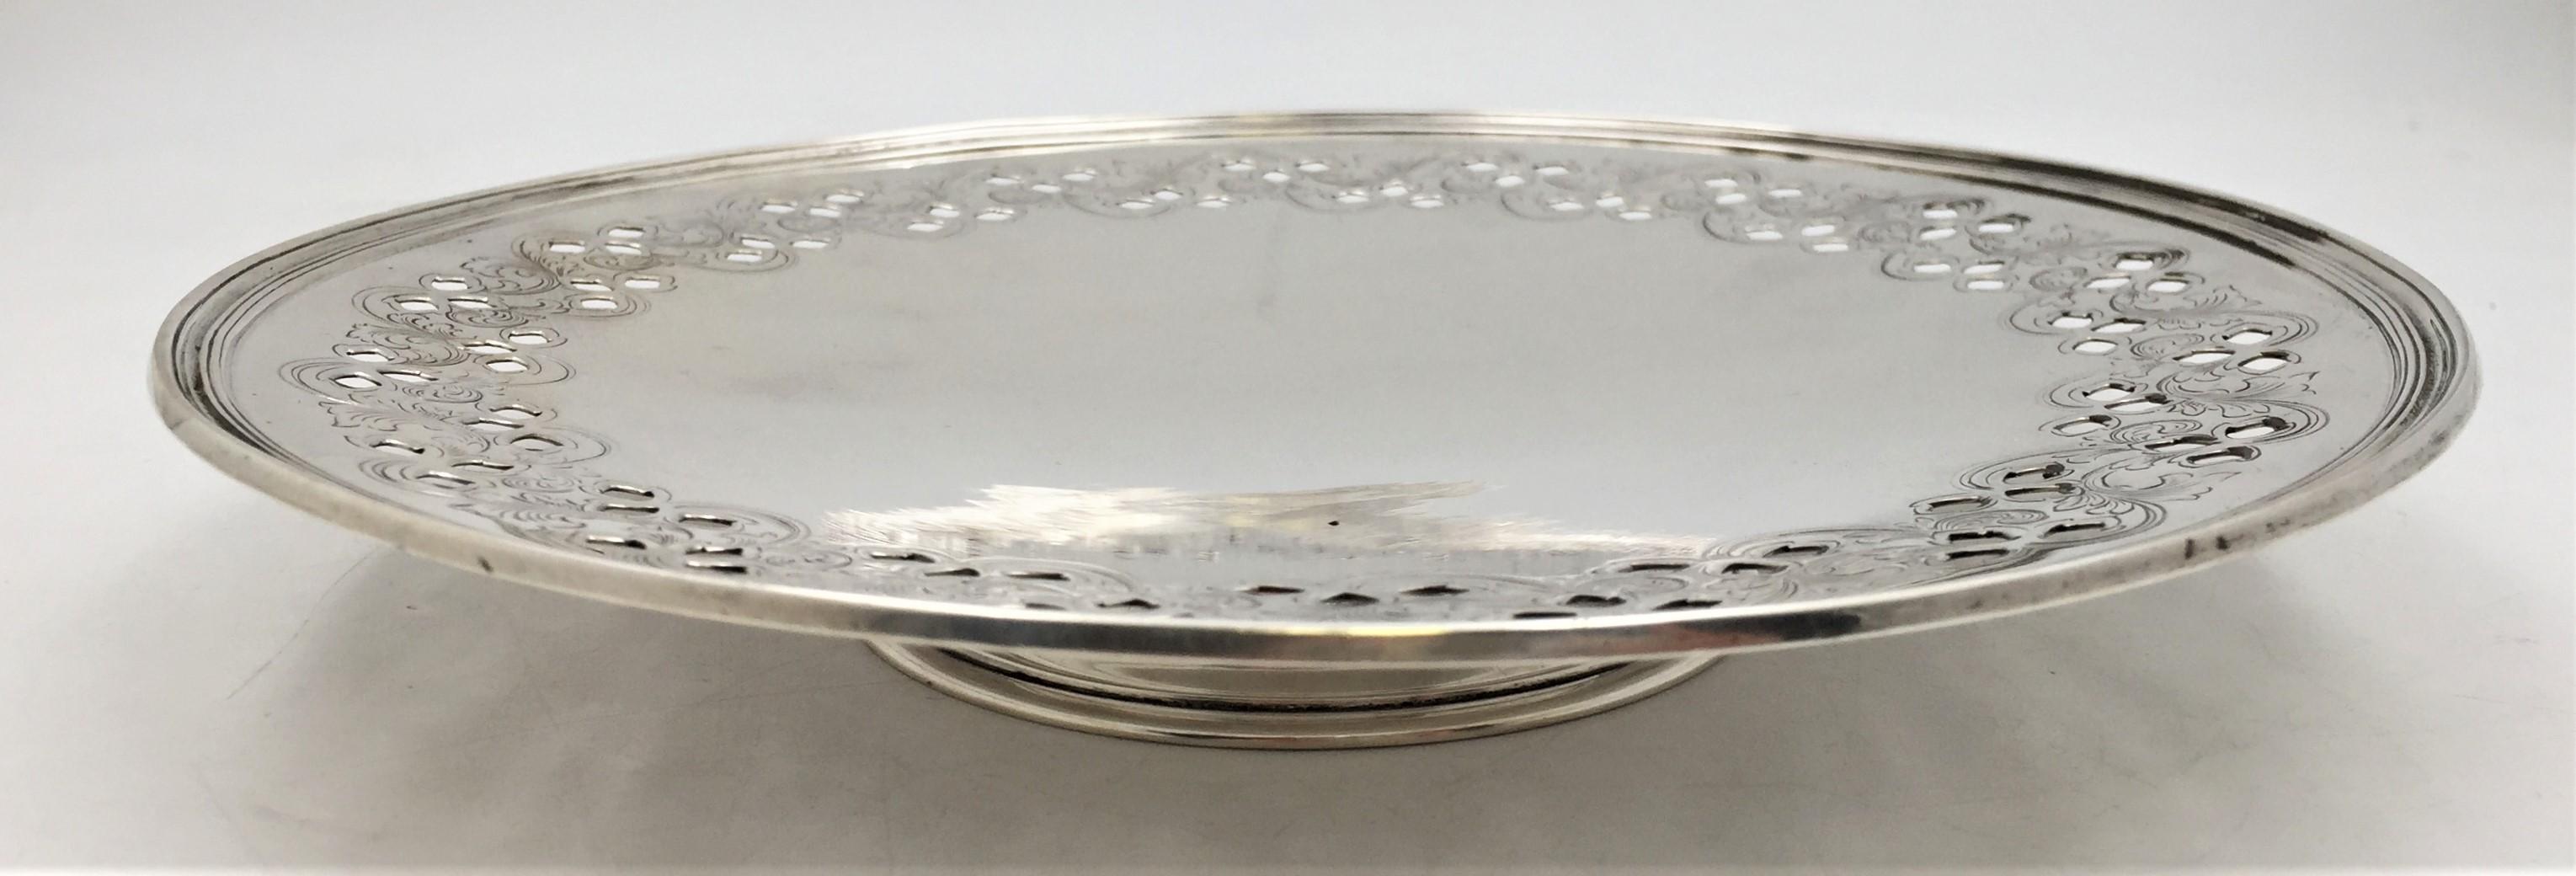 Tiffany & Co. sterling silver footed platter or compote in exquisite Art Nouveau style with pierced and engraved leaf motifs in stylized manner and in pattern number 16971A from 1907. It measures 10 1/2'' in diameter by 1 2/3'' in height, weighs